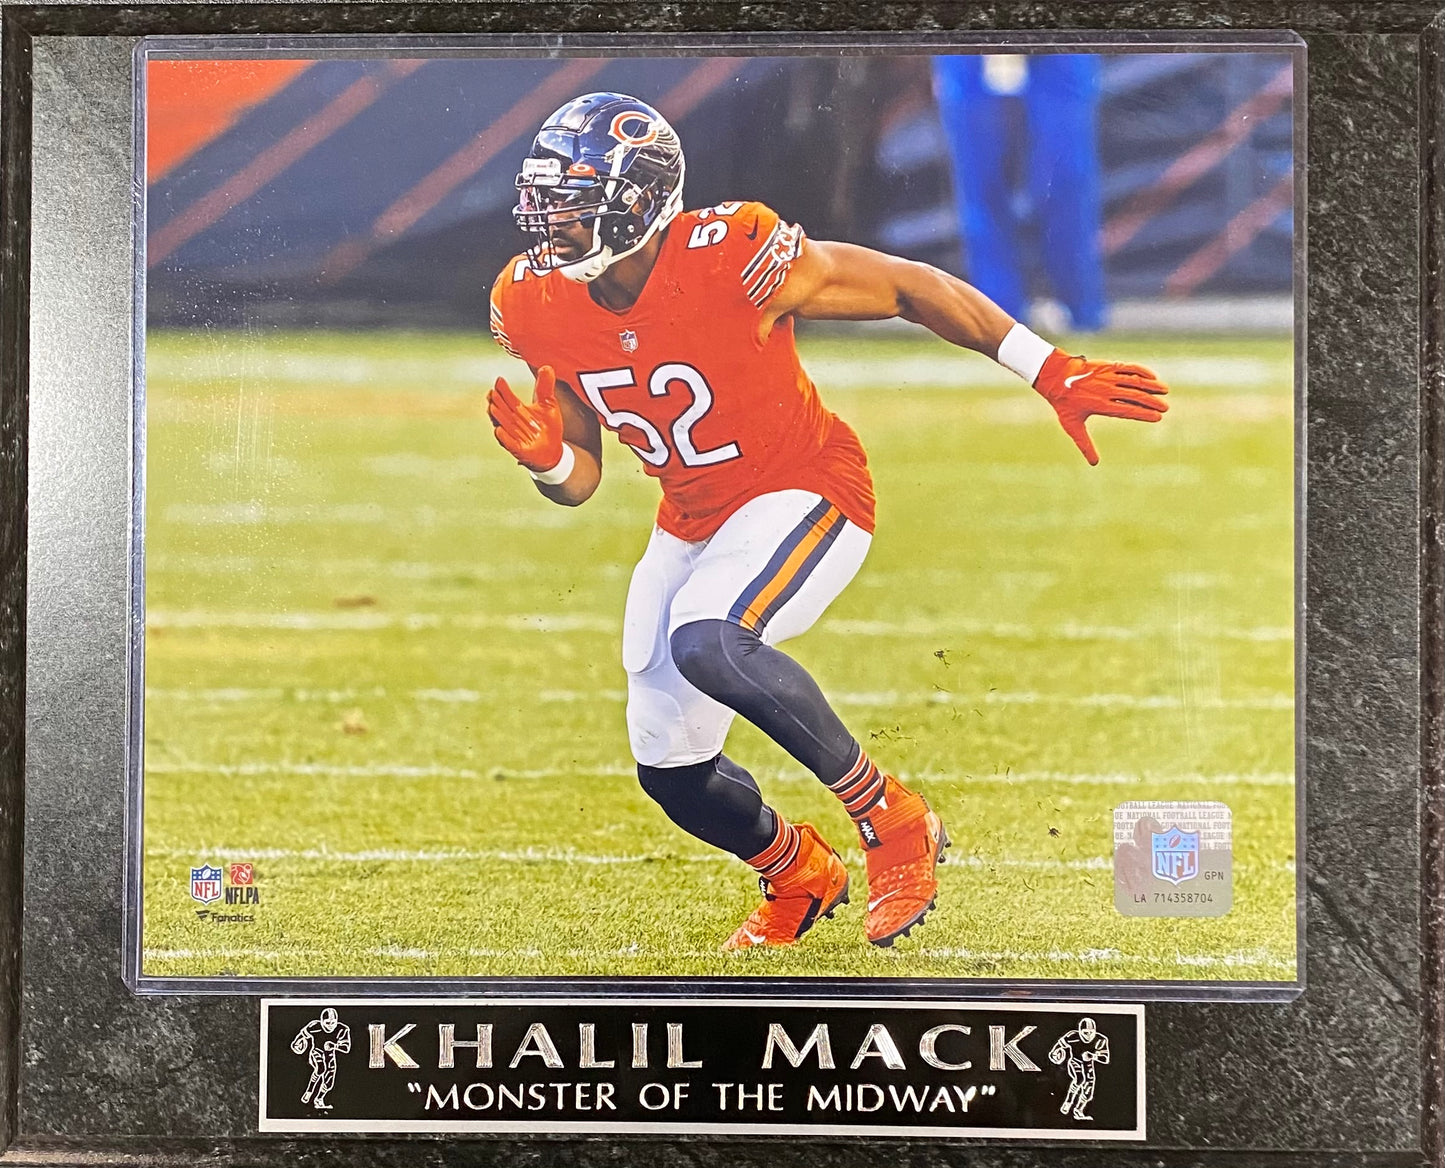 Khalil Mack "Monster of the Midway" Chicago Bears Wall Plaque